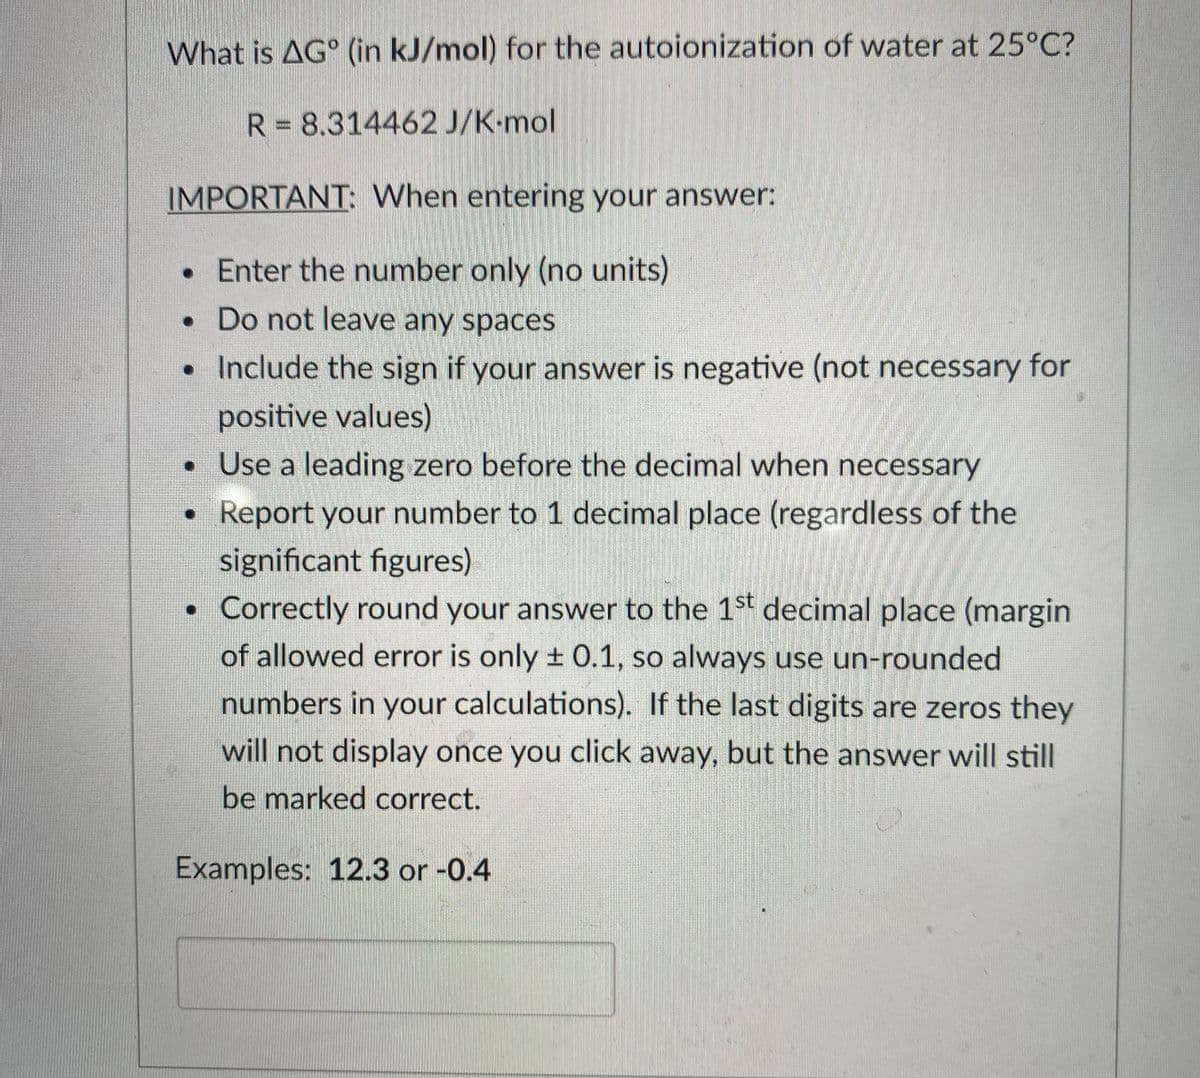 What is AG° (in kJ/mol) for the autoionization of water at 25°C?
R = 8.314462 J/K-mol
IMPORTANT: When entering your answer:
• Enter the number only (no units)
• Do not leave any spaces
• Include the sign if your answer is negative (not necessary for
positive values)
• Use a leading zero before the decimal when necessary
Report your number to 1 decimal place (regardless of the
significant figures)
• Correctly round your answer to the 1st decimal place (margin
of allowed error is only ± 0.1, so always use un-rounded
numbers in your calculations). If the last digits are zeros they
will not display once you click away, but the answer will still
be marked correct.
Examples: 12.3 or -0.4
